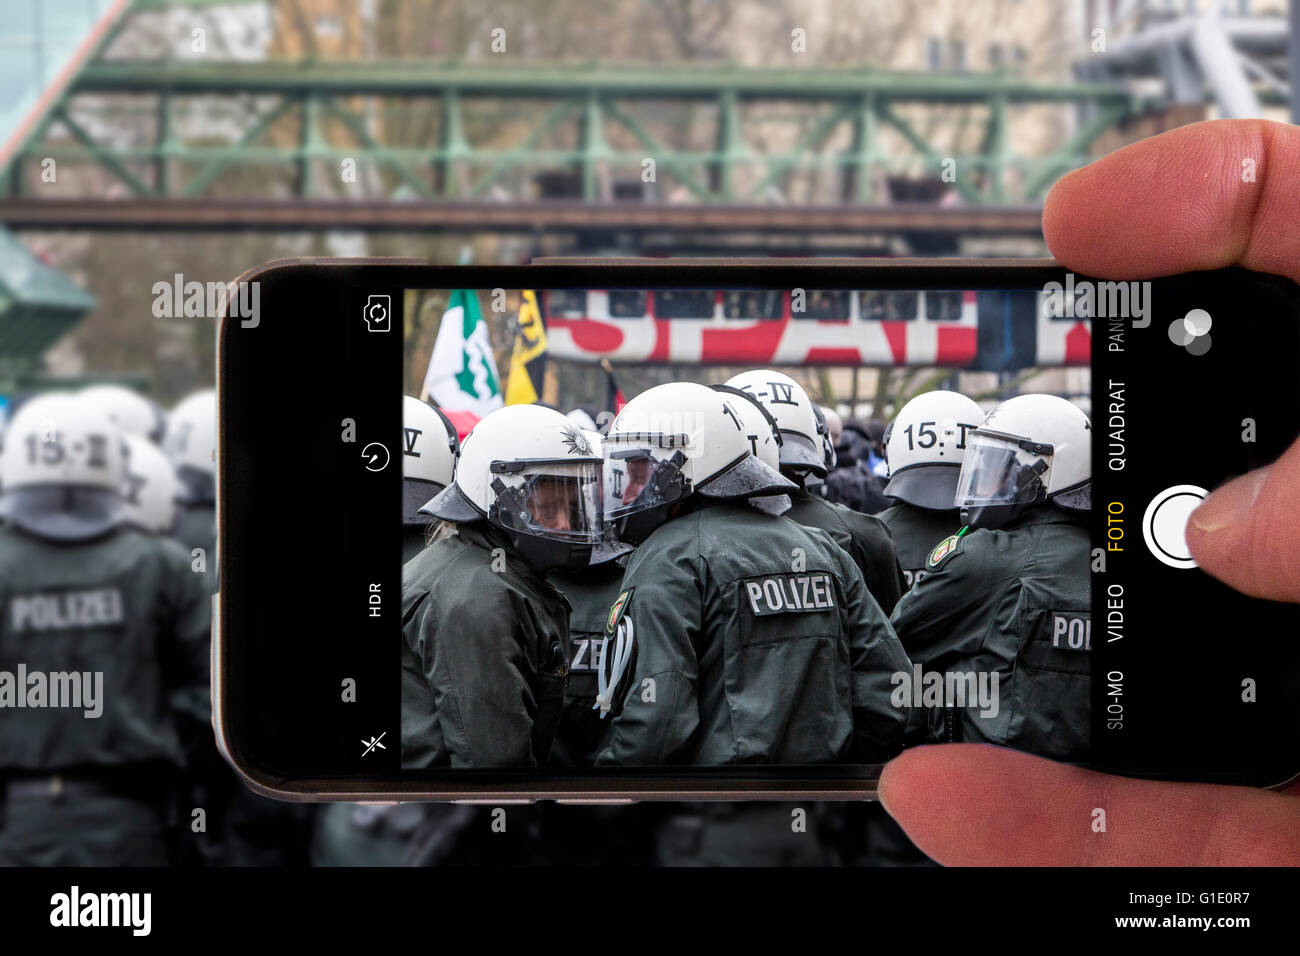 Onlookers take picture with a mobile phone camera, of police operation, symbolic image, photomontage, photo composition, Stock Photo